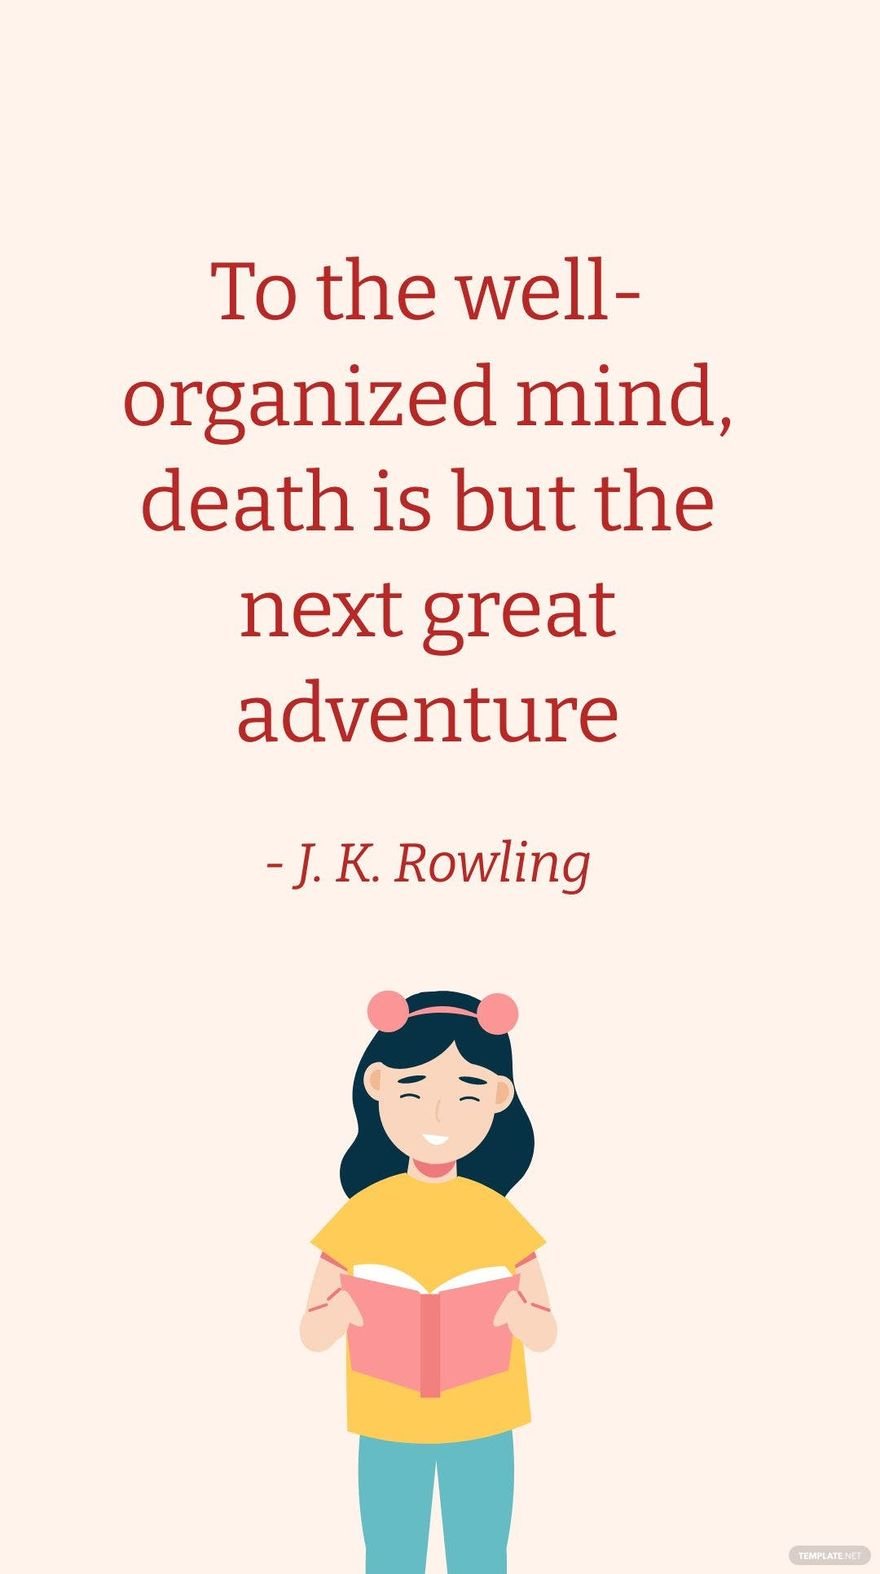 J. K. Rowling - To the well-organized mind, death is but the next great adventure in JPG